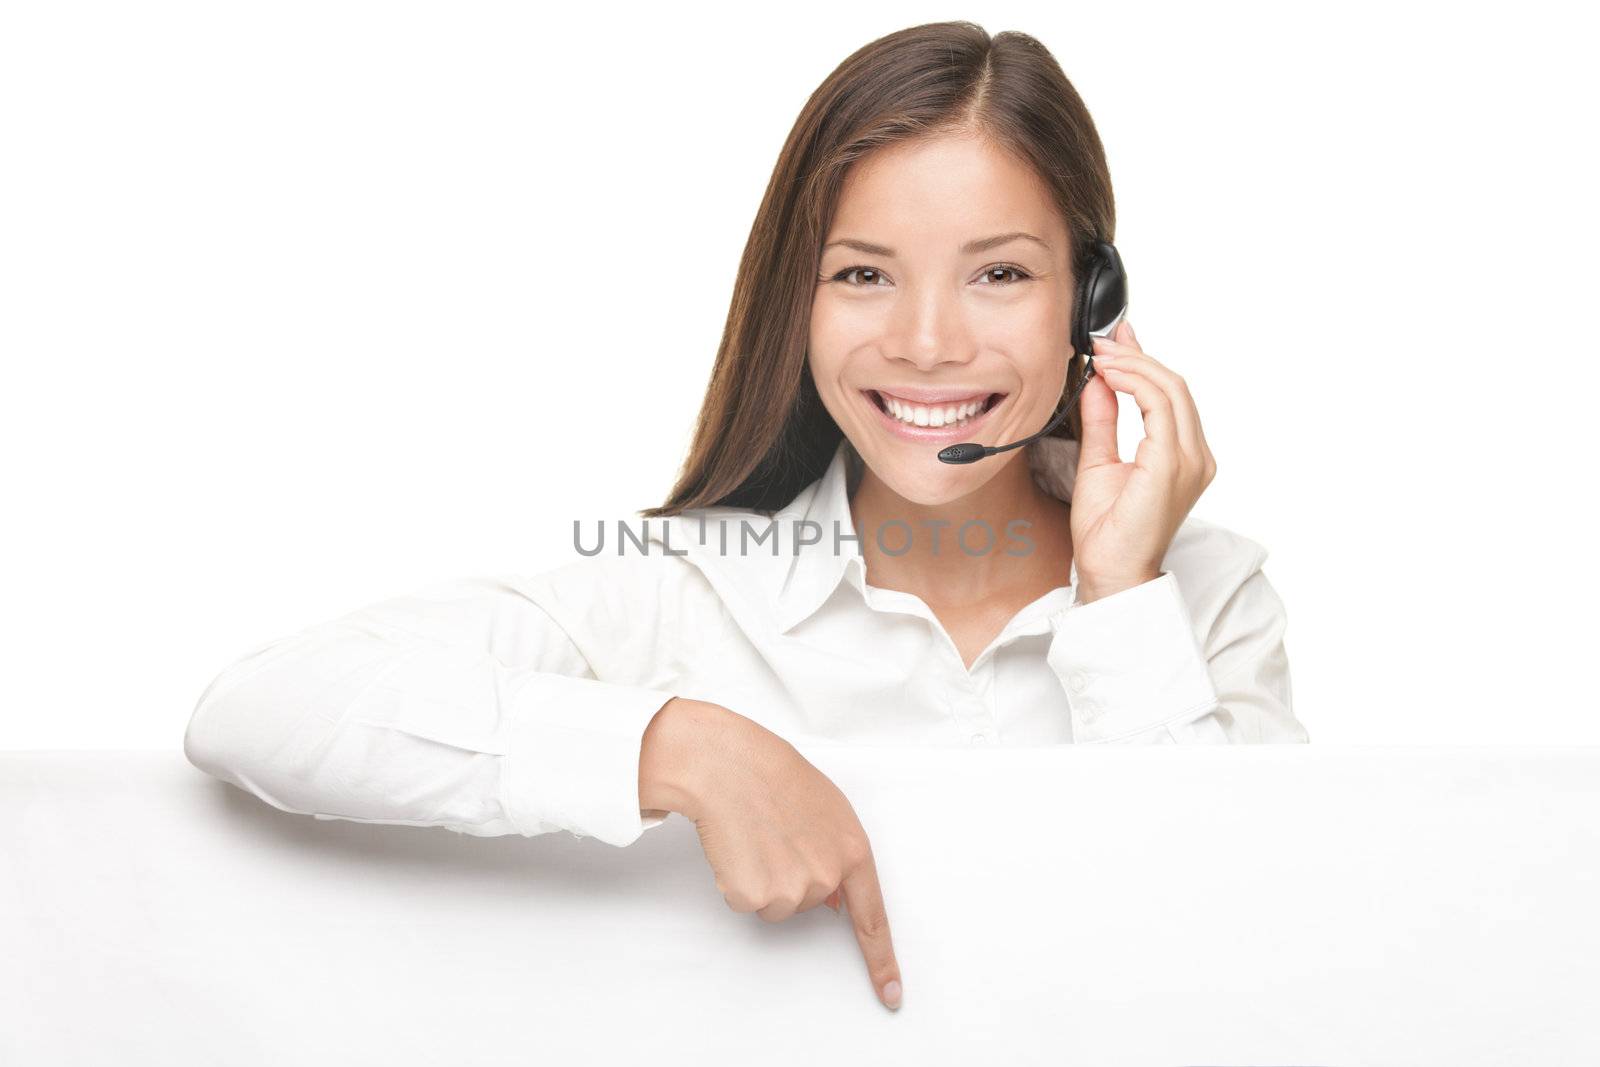 Customer Service woman with headset showing and pointing at blank billboard sign banner, Young smiling Chinese Asian / Caucasian female model.